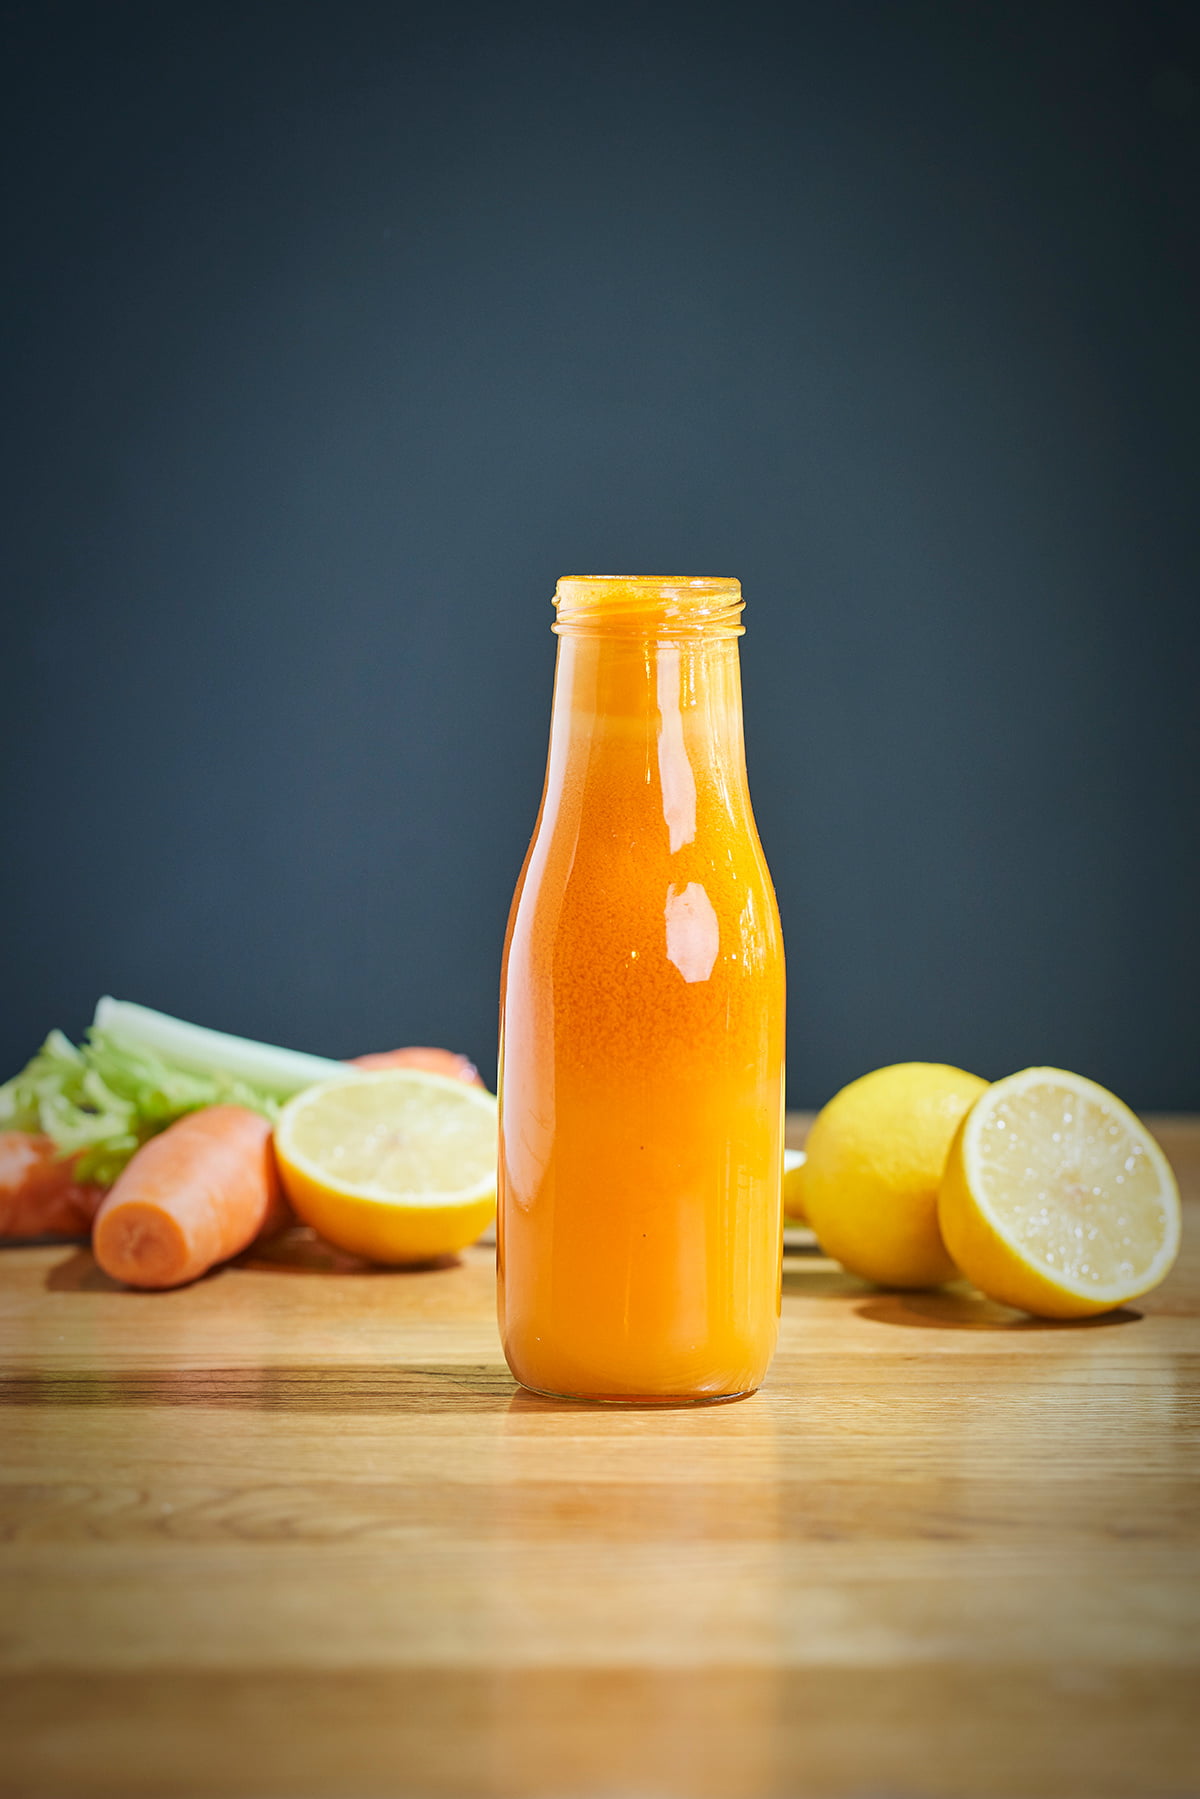 JUICE OF THE MONTH – DETOX ME